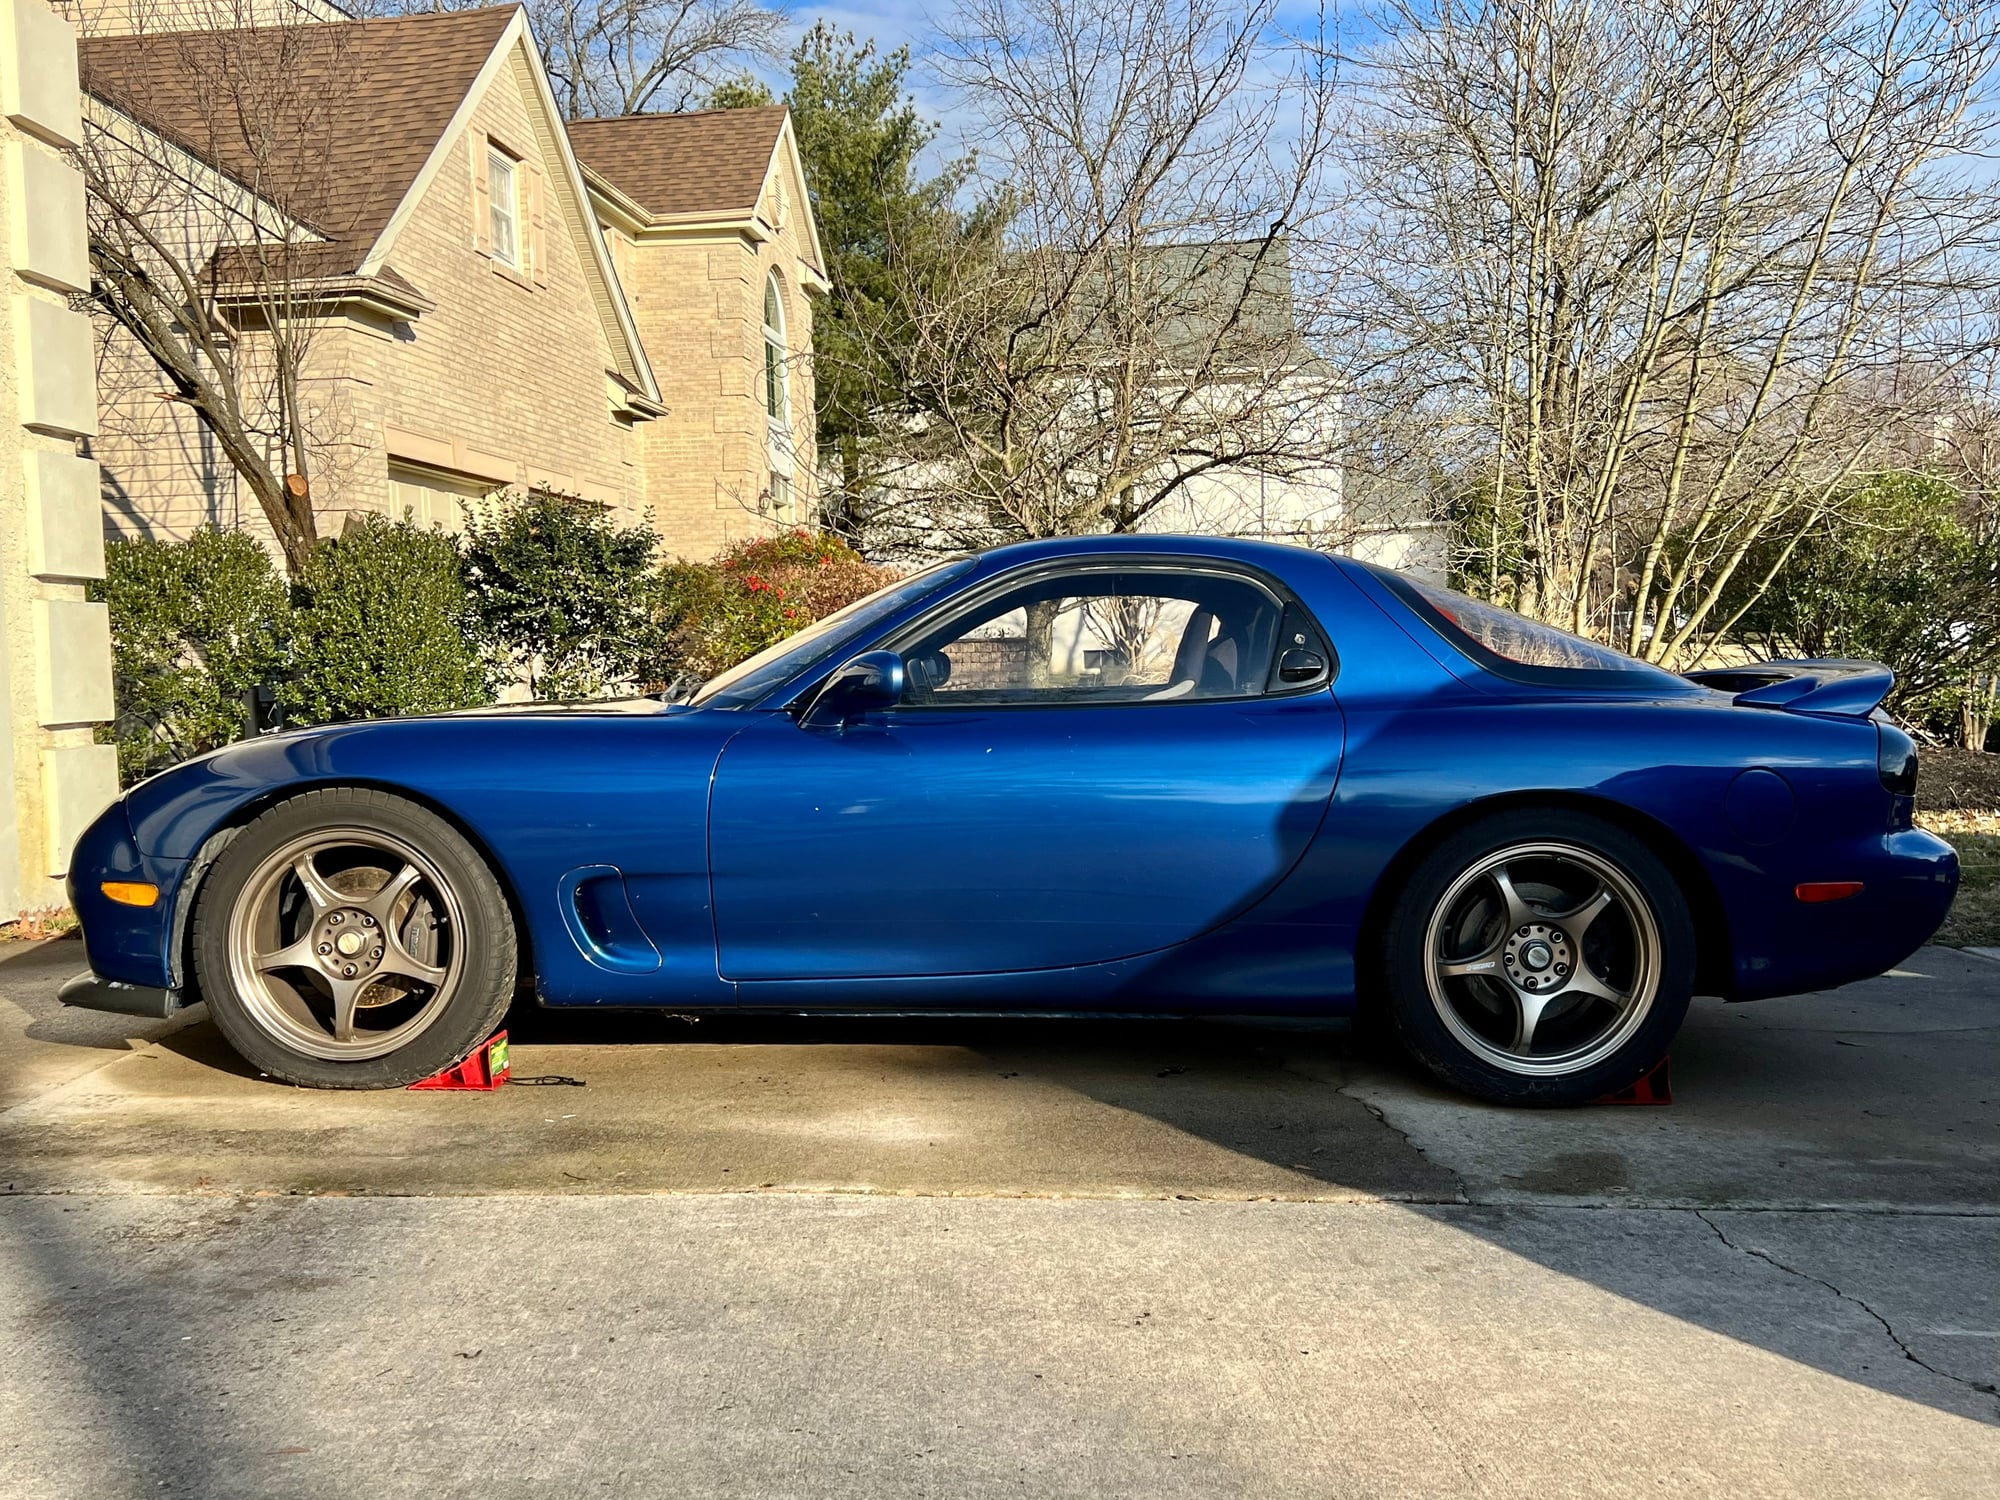 1993 Mazda RX-7 - Dormant 1993 RX7 R1 (Not Running) - Used - VIN JM1FD3319P0206142 - 90,000 Miles - 2WD - Manual - Coupe - Blue - Cherry Hill, NJ 08003, United States